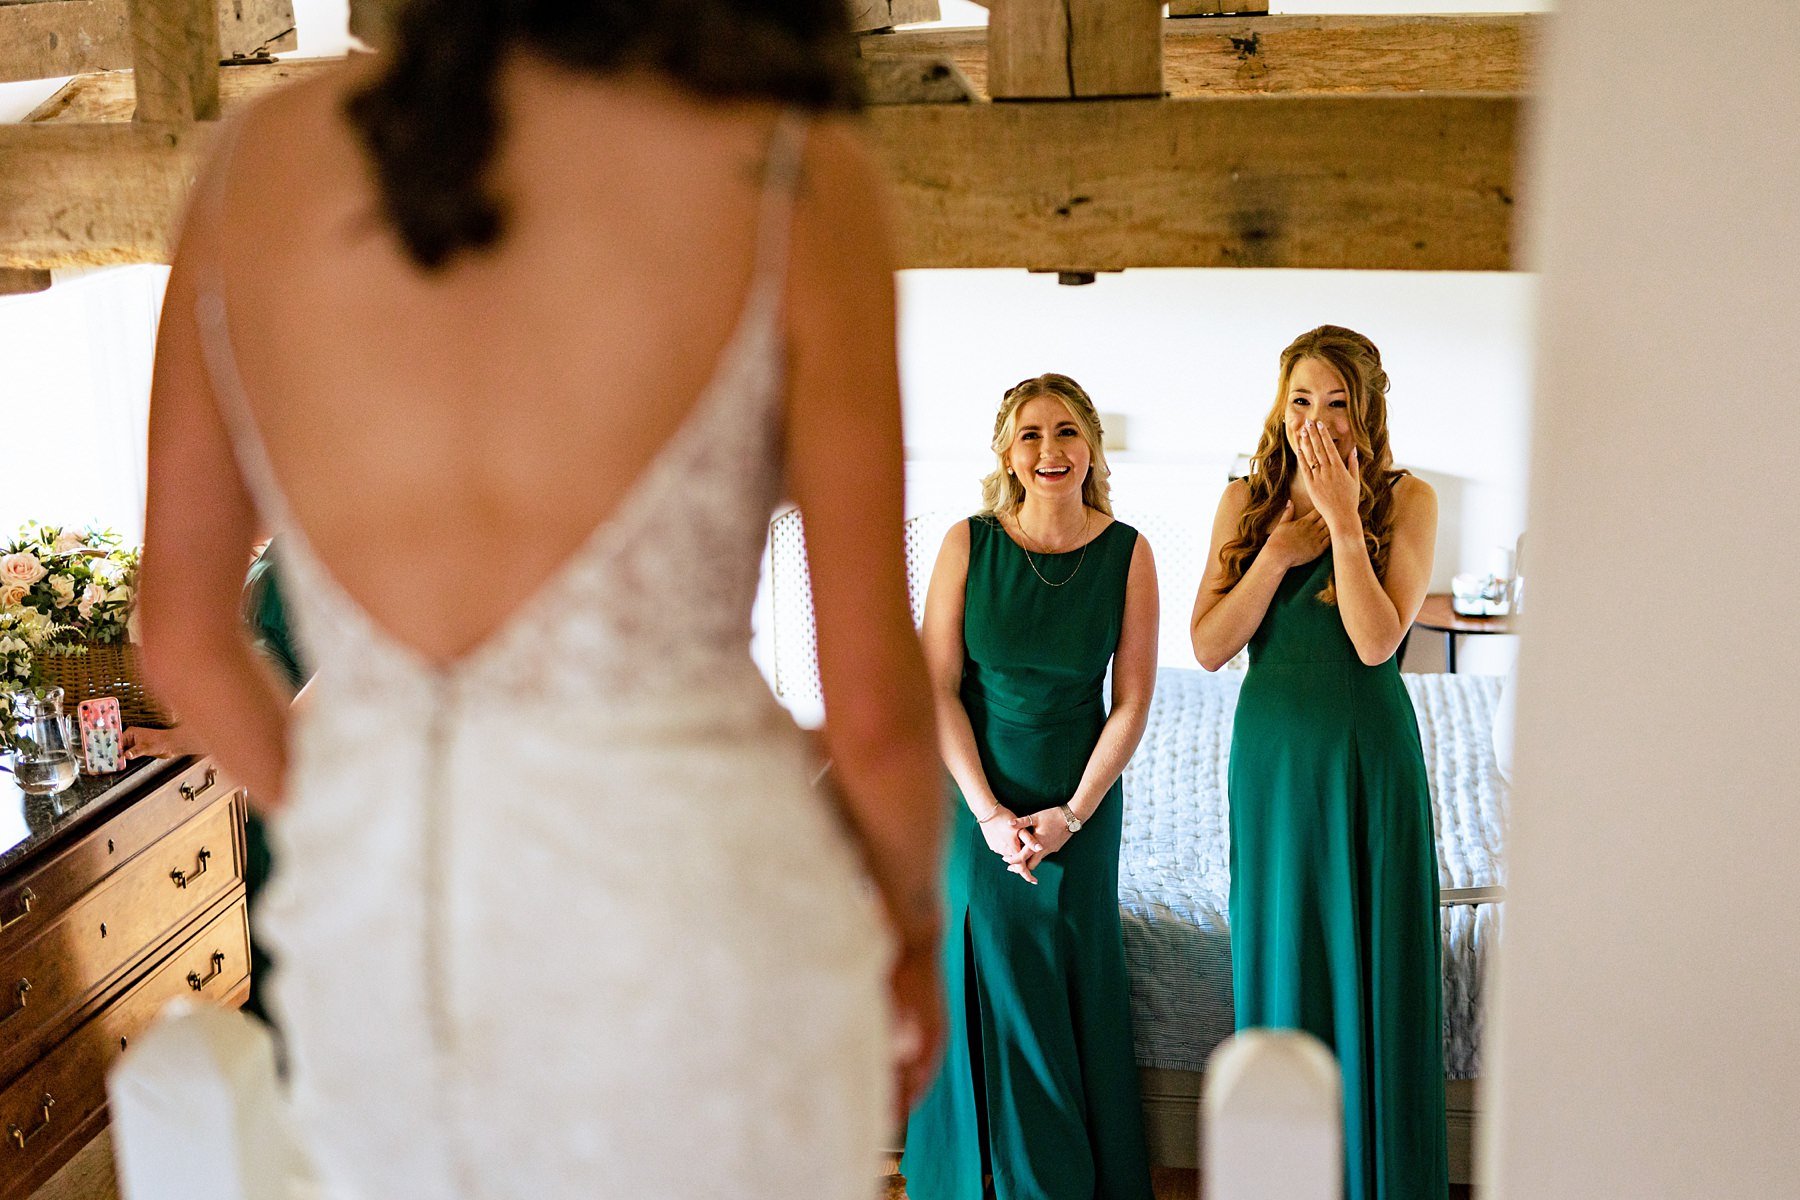 A bridesmaid smiling covering her mouth in excitement as she sees her friend in her wedding dress just before her wedding